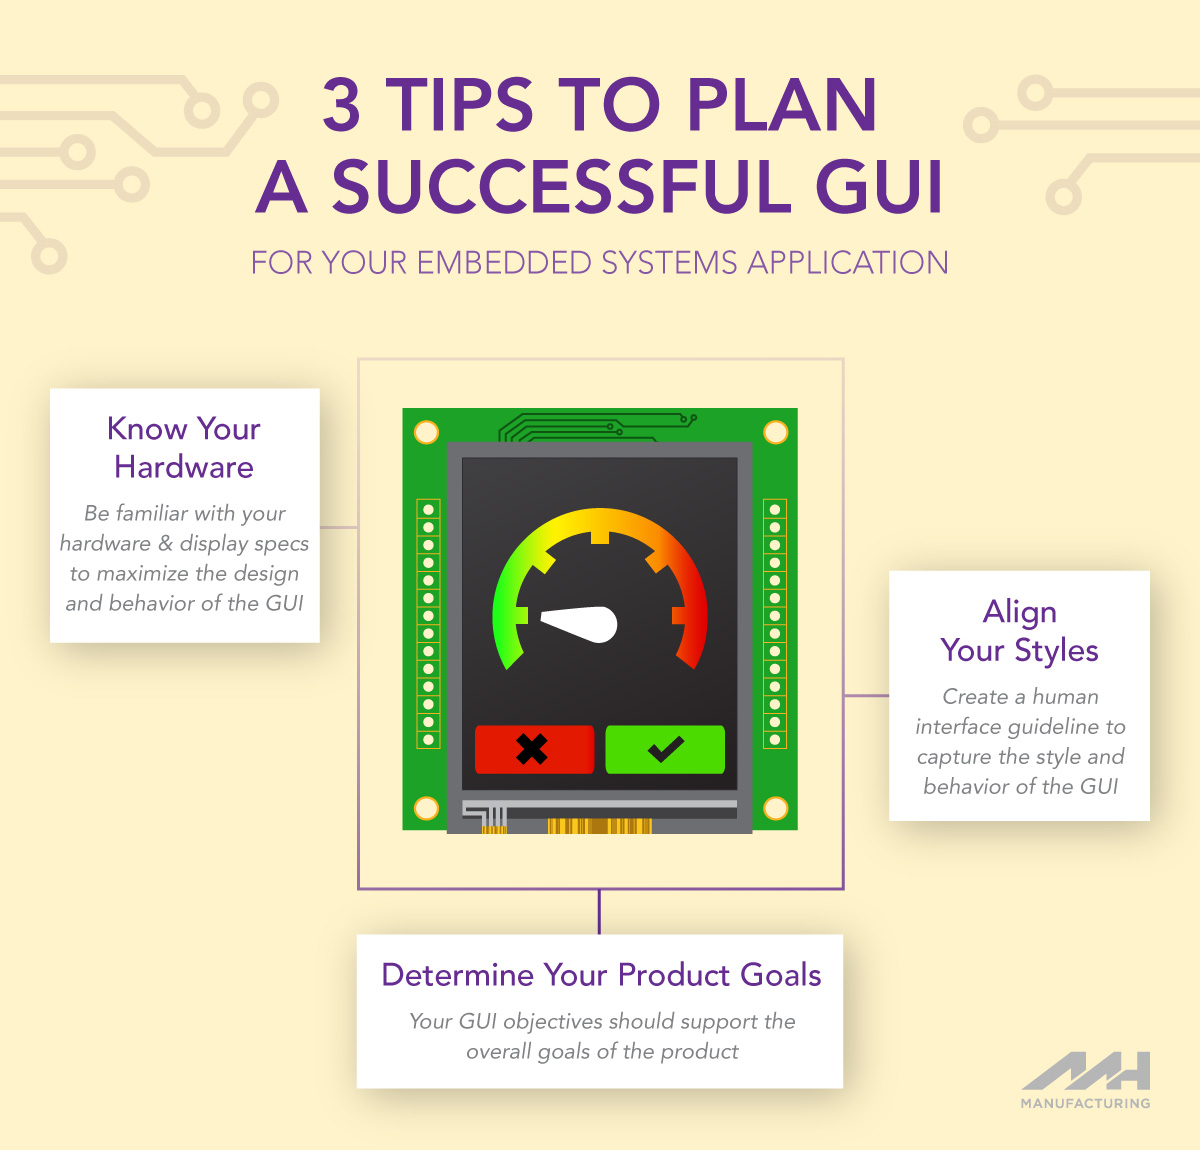 3 Tips to Plan Successful GUI infographic